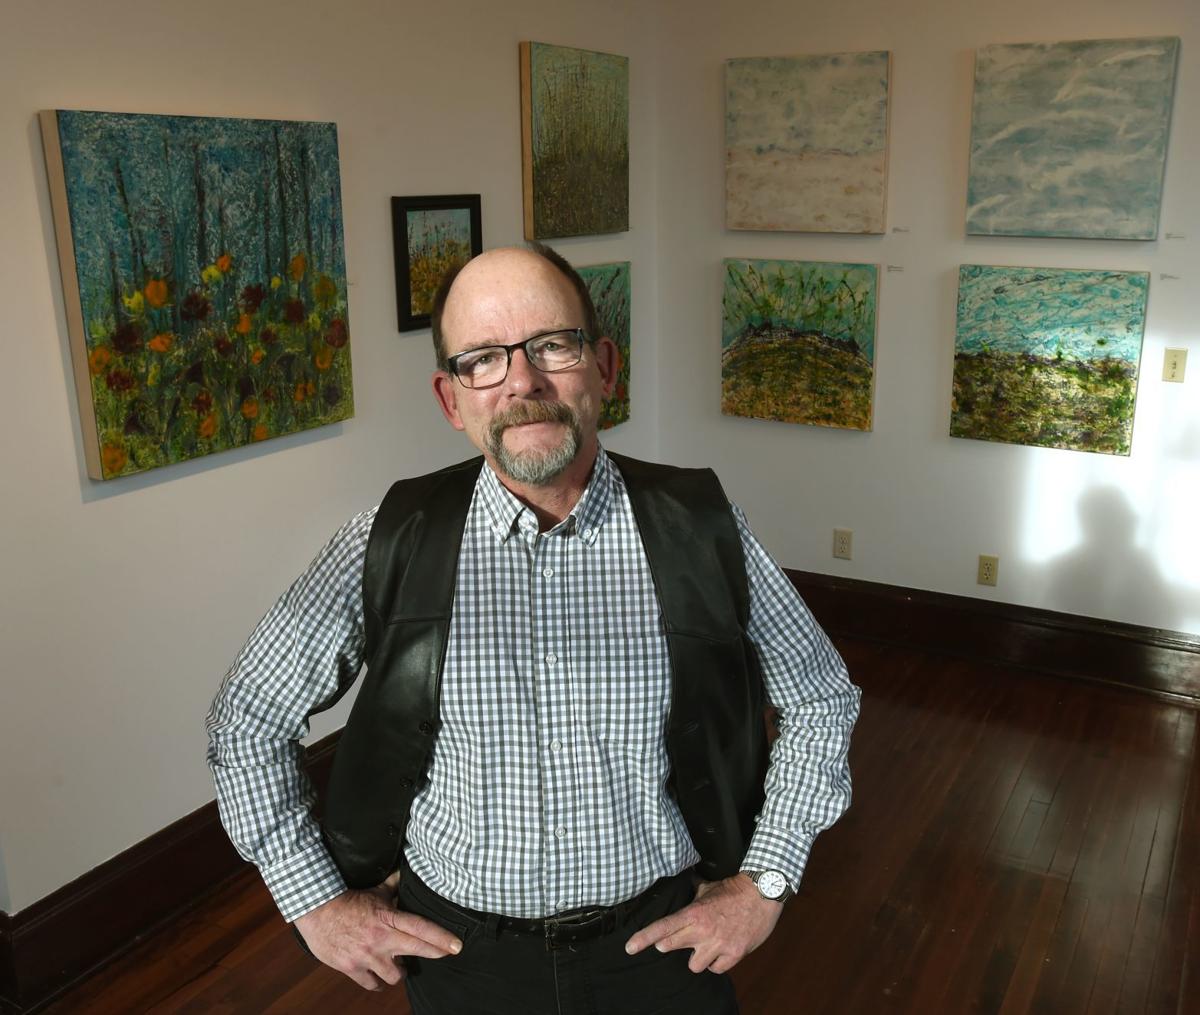 Former YAM curator uses art connections to open own gallery